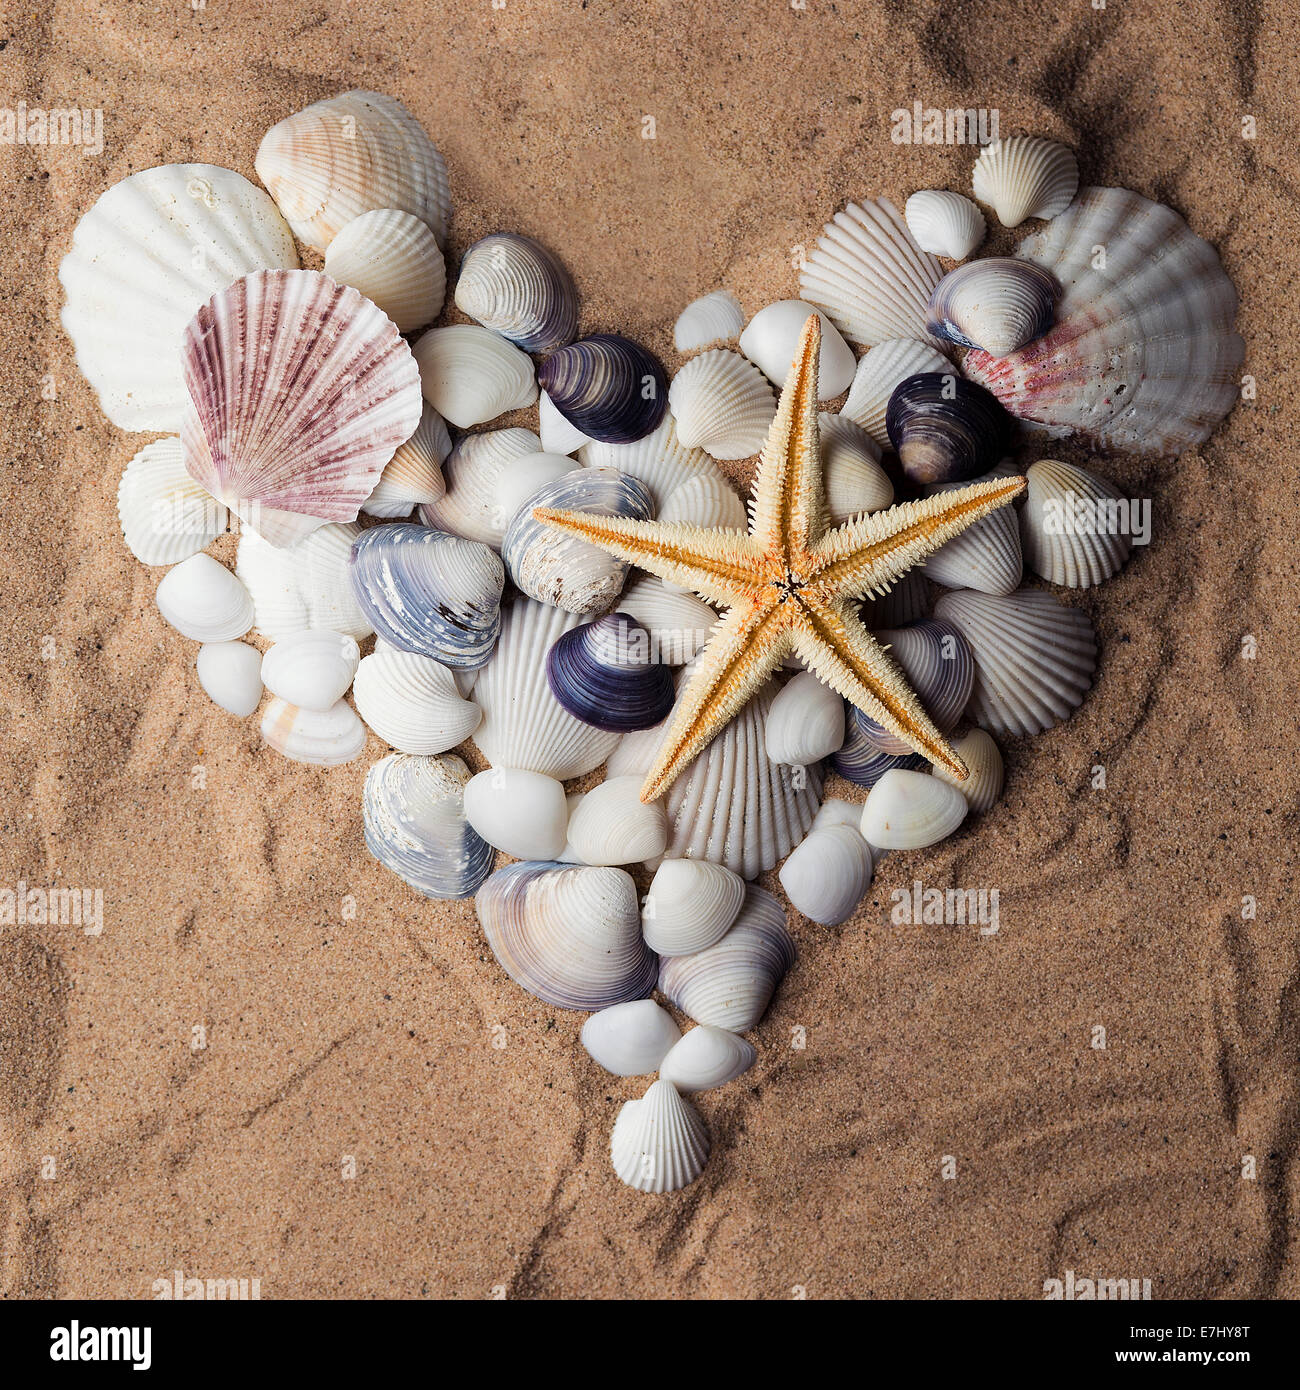 A heart made out of seashells Stock Photo